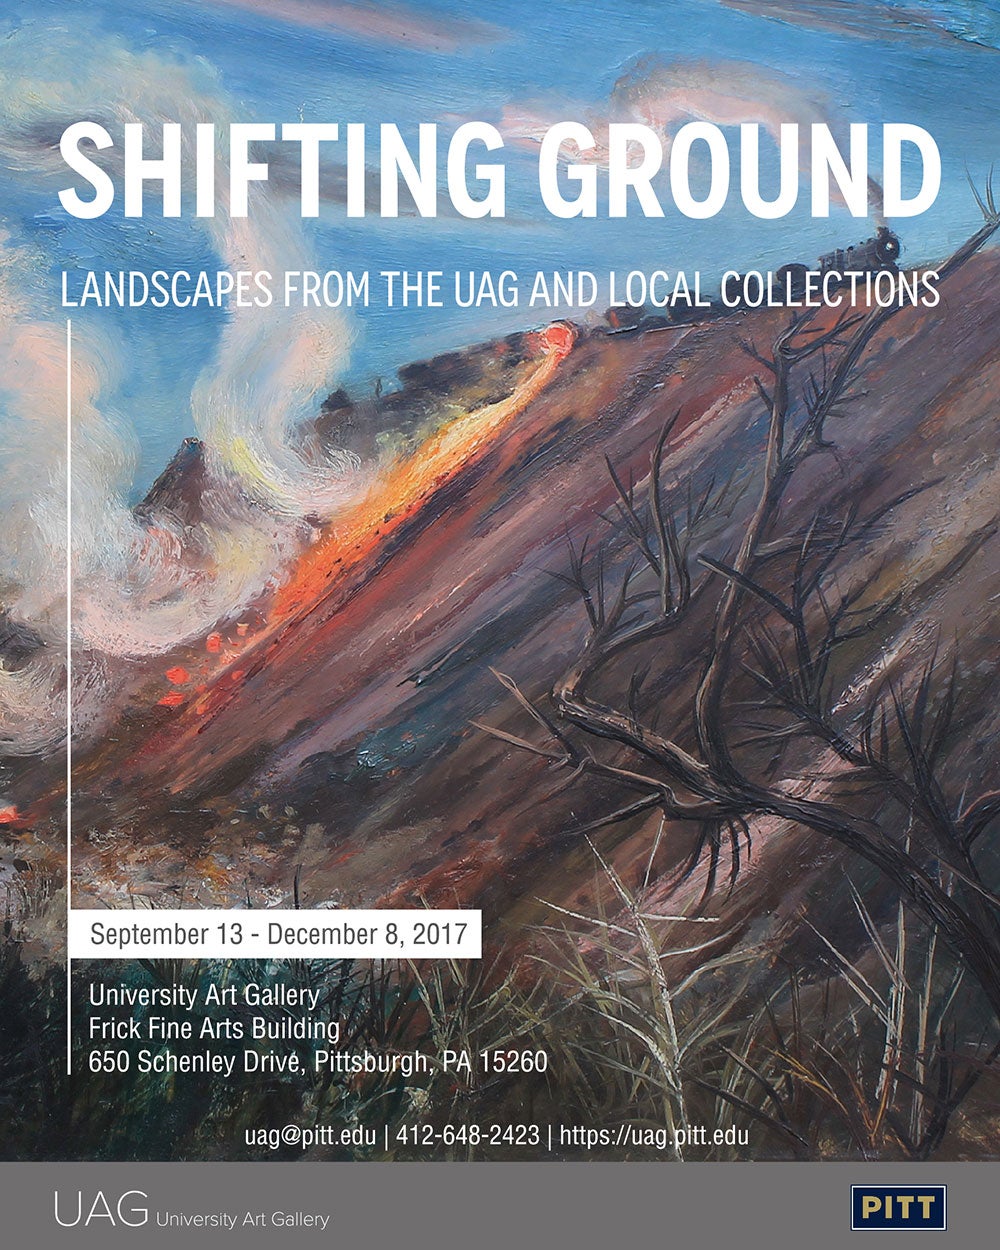 University Art Gallery Exhibition Shifting Ground: Landscapes from the UAG and Local Collections